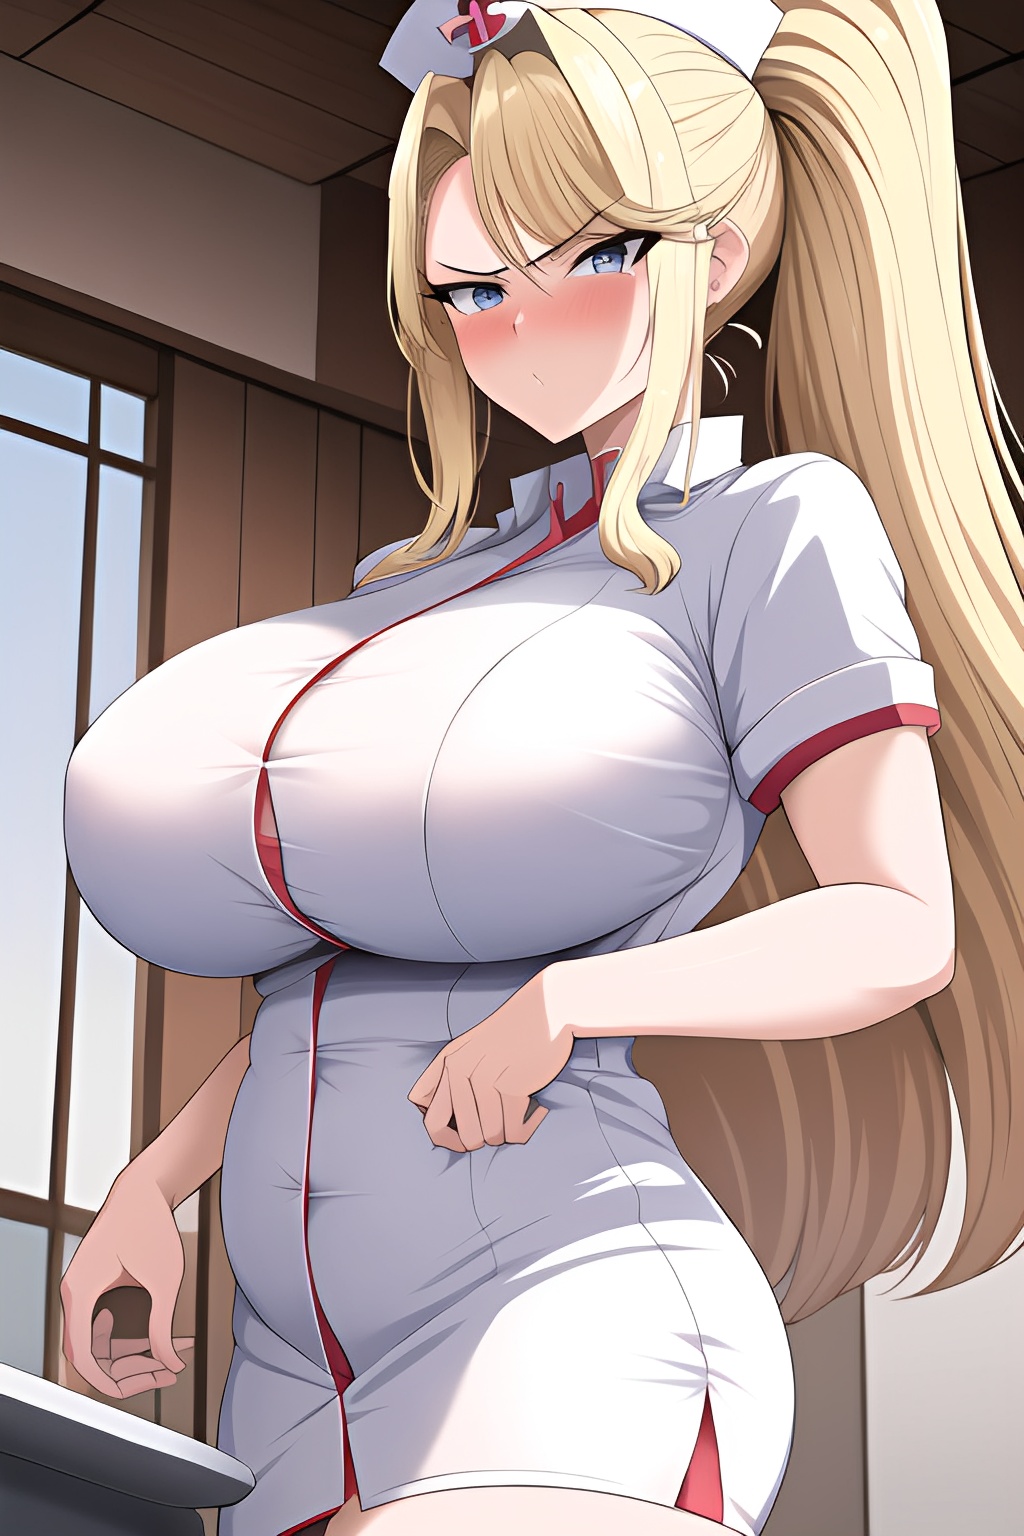 60s Cartoon Porn - Anime Busty Huge Boobs 60s Age Angry Face Blonde Slicked Hair Style Light  Skin Comic Yacht Close Up View Bathing Nurse - AI Hentai